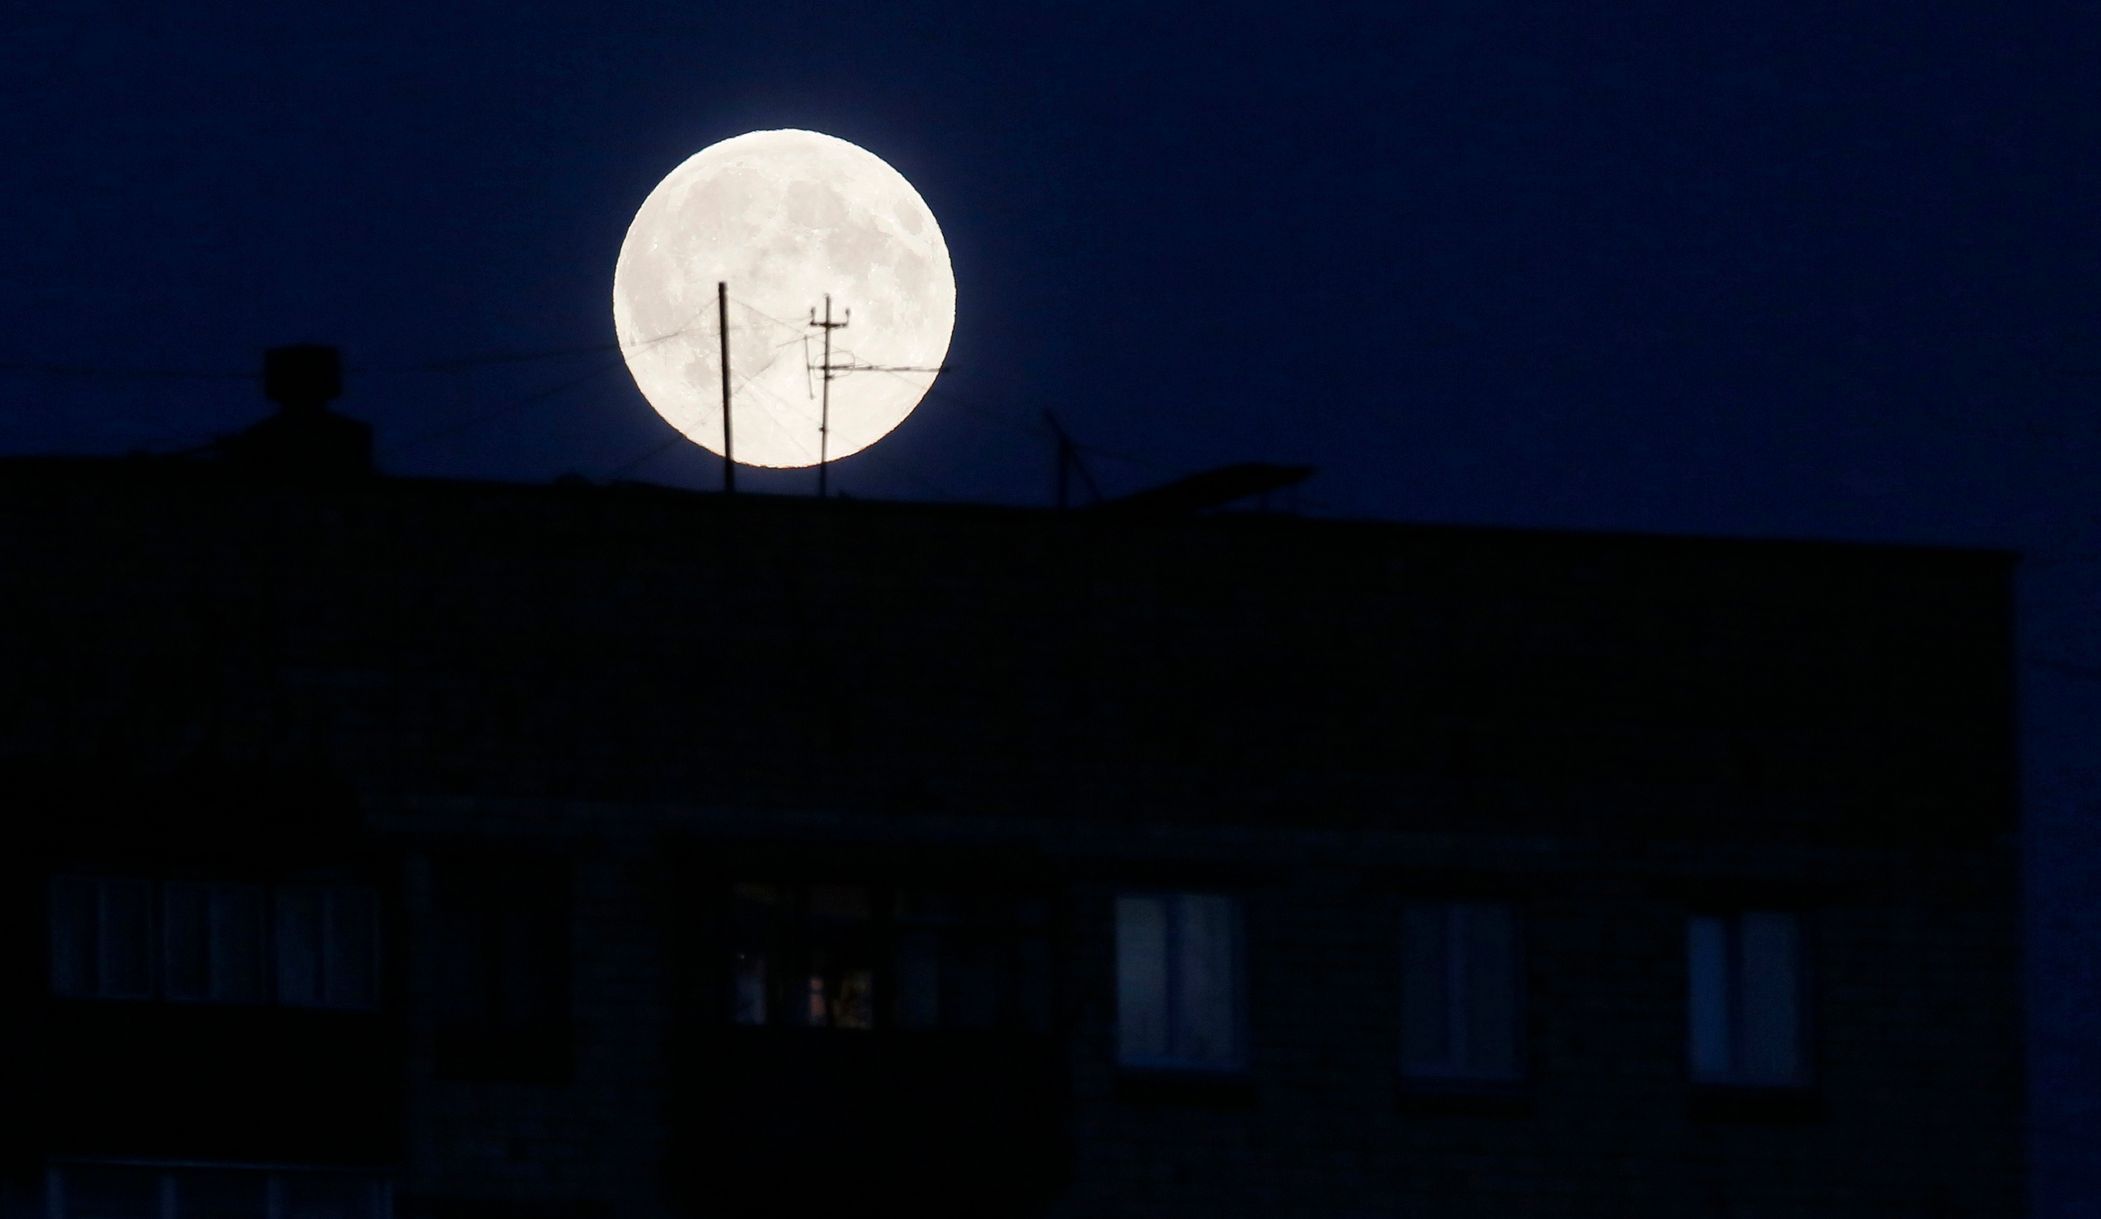 Supermoon is seen behind a residential block of flats in Russia's Siberian city of Krasnoyarsk